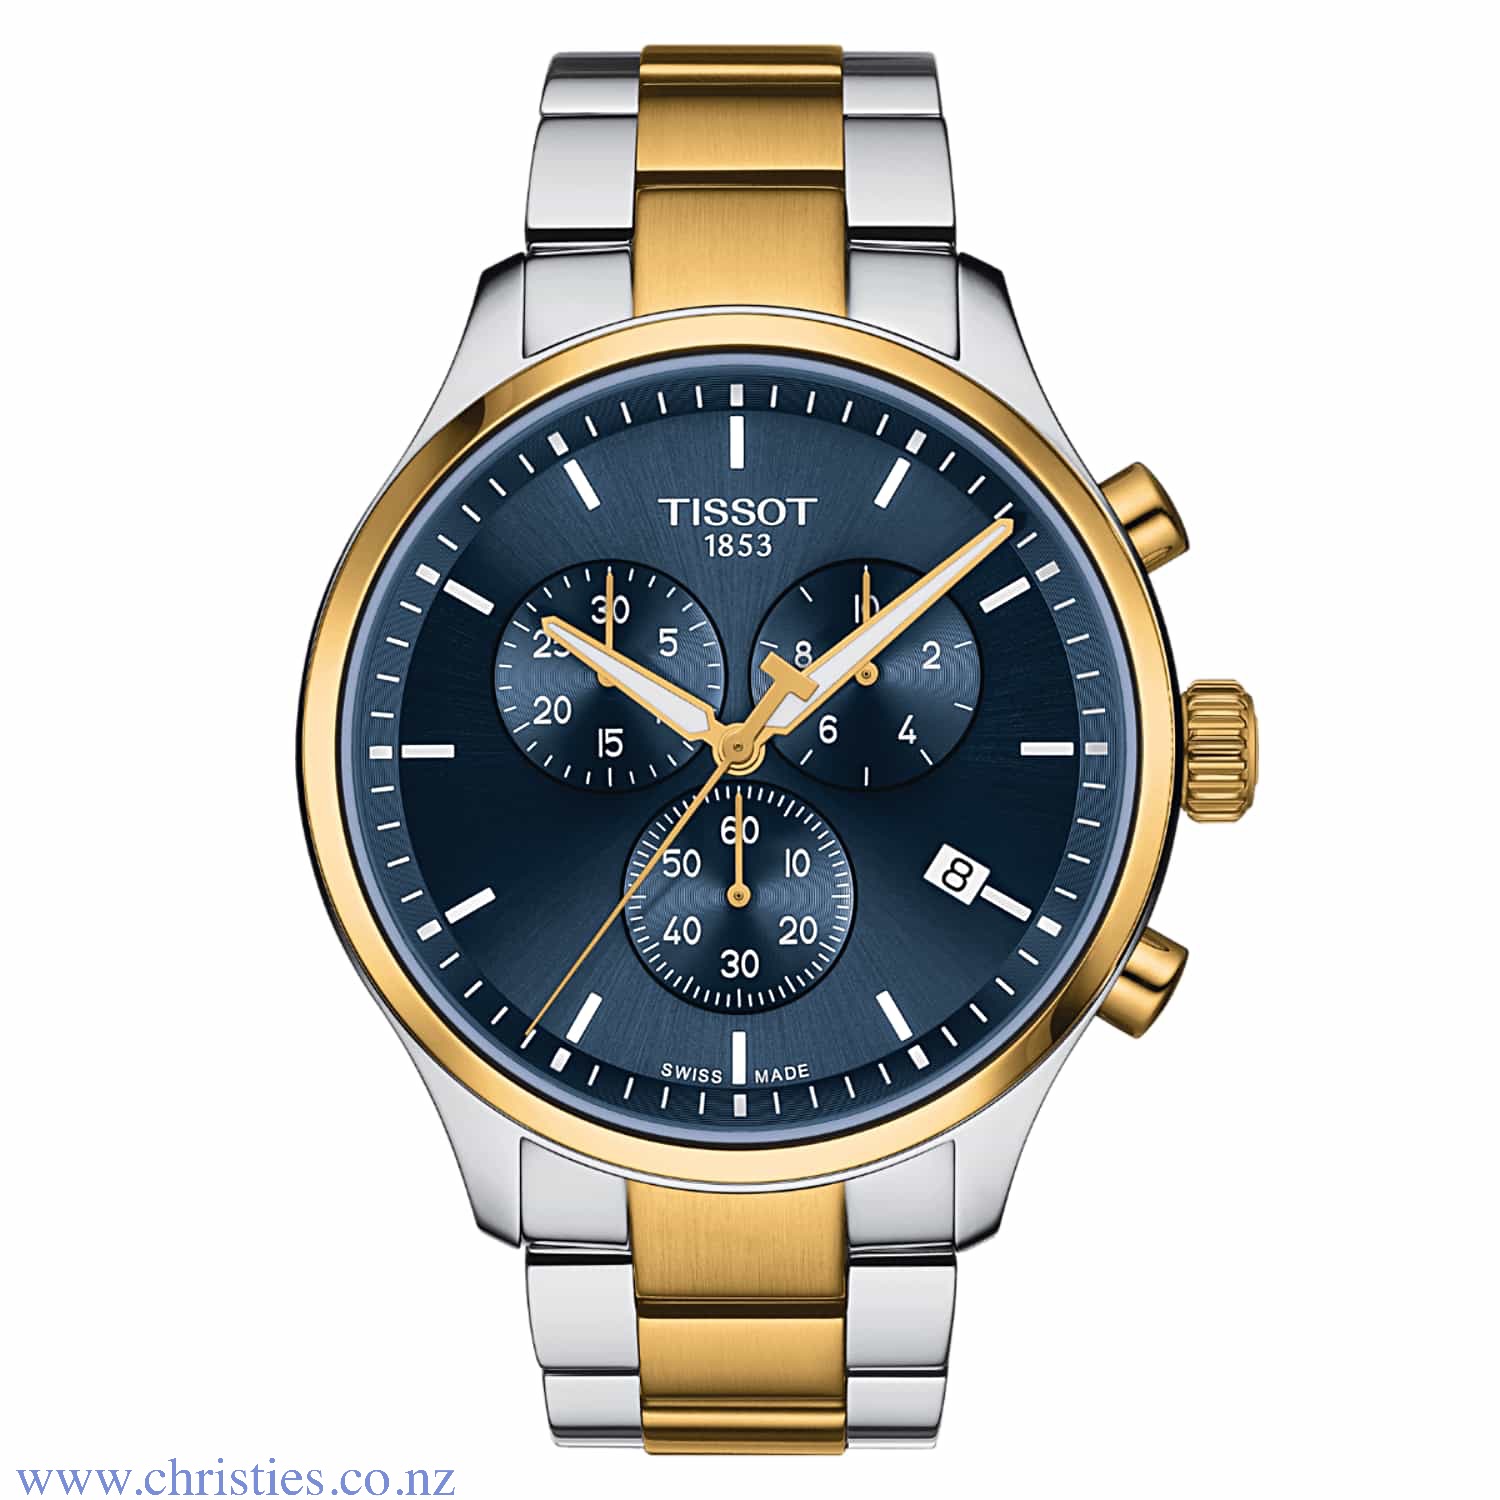 TISSOT Chrono Xl Classic T116.617.22.041.00. The Tissot Chrono XL Classic is one of the largest chronographs (45mm) in the Tissot collection. Keeping the spirit of the original Tissot Chrono XL but now with a more elegant and classical design. A great wat